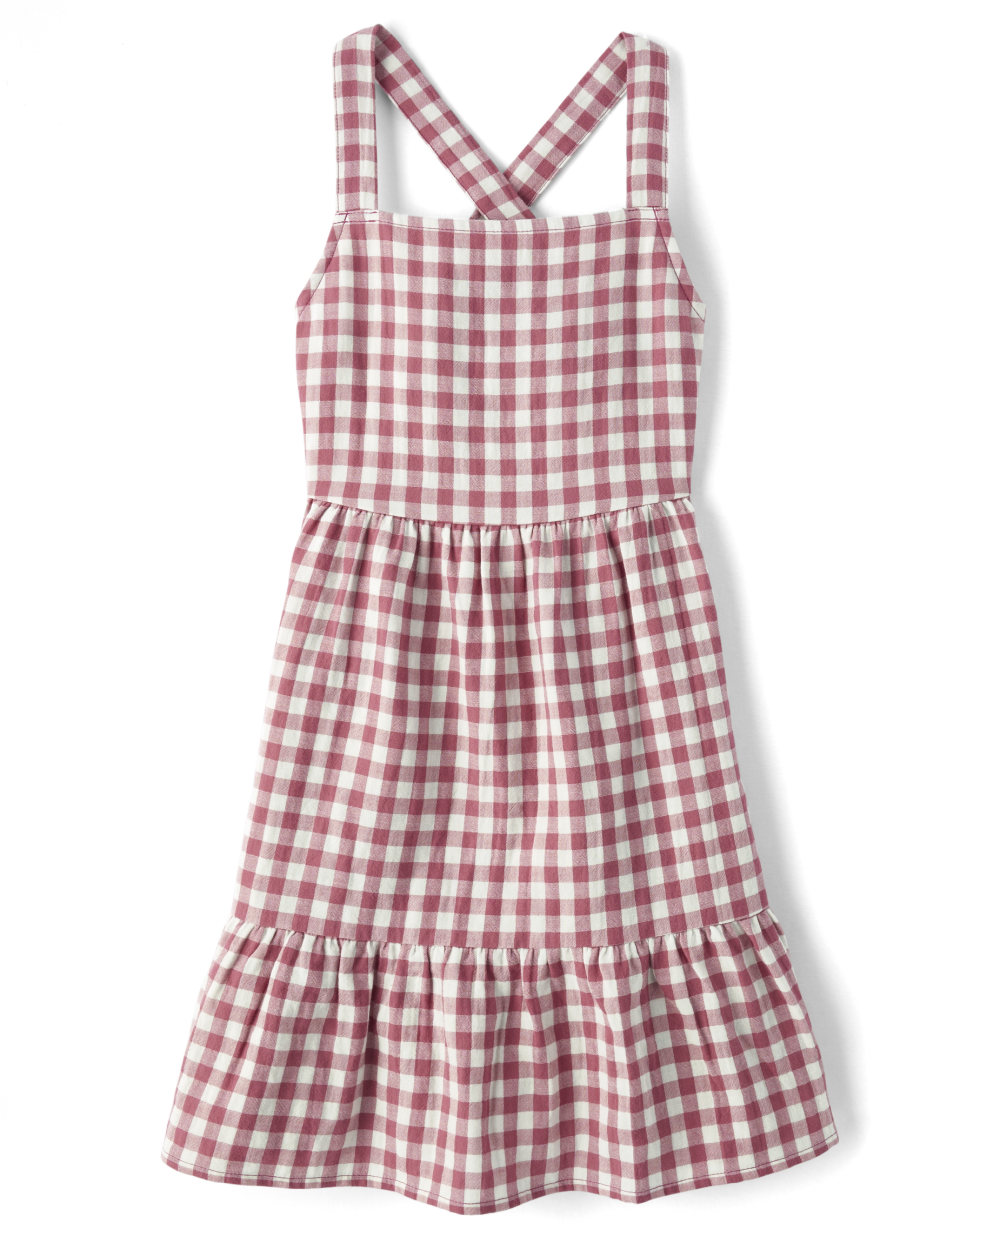 Girls Square Neck Above the Knee Checkered Gingham Print Sleeveless Dress With Ruffles